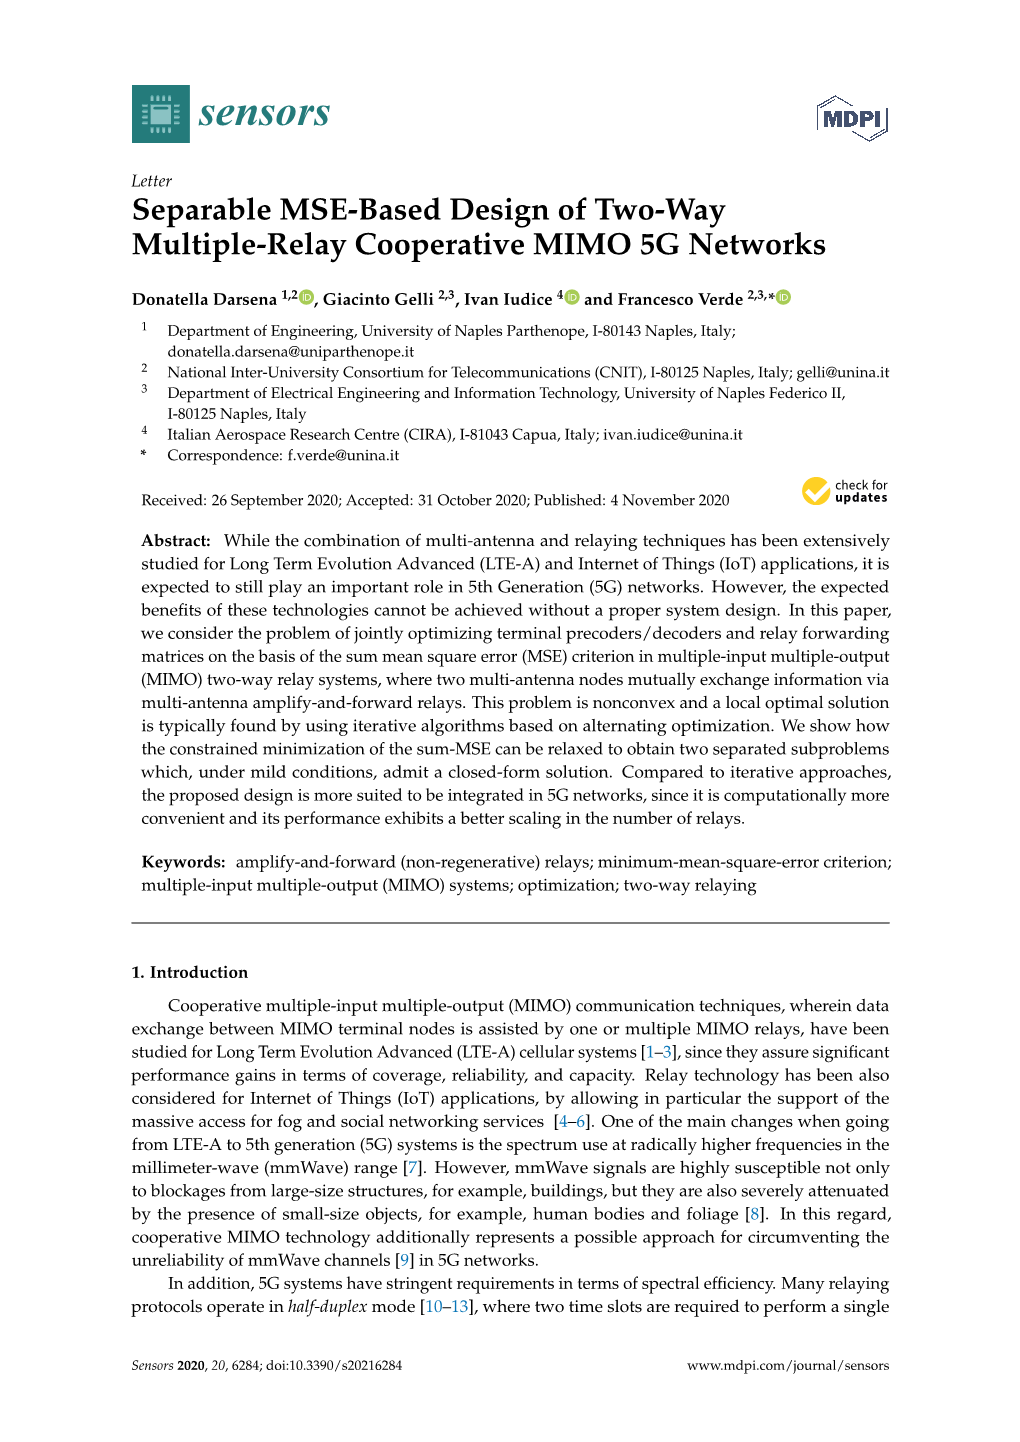 Separable MSE-Based Design of Two-Way Multiple-Relay Cooperative MIMO 5G Networks